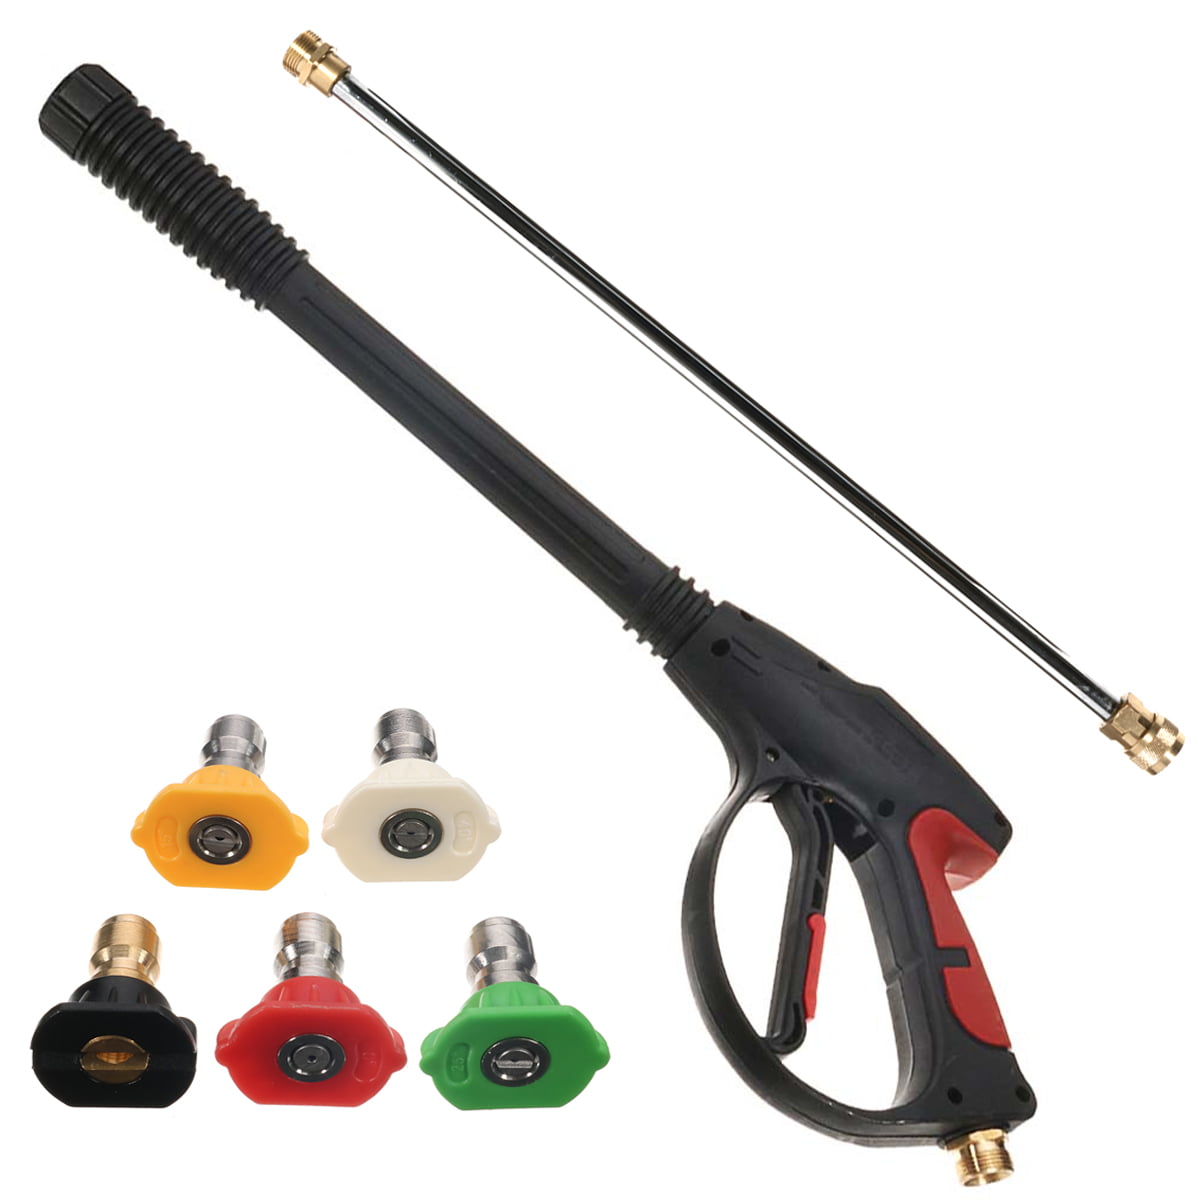 5 Spray Nozzle Tips Pressure Washer Gun with 16" Extension Wand 